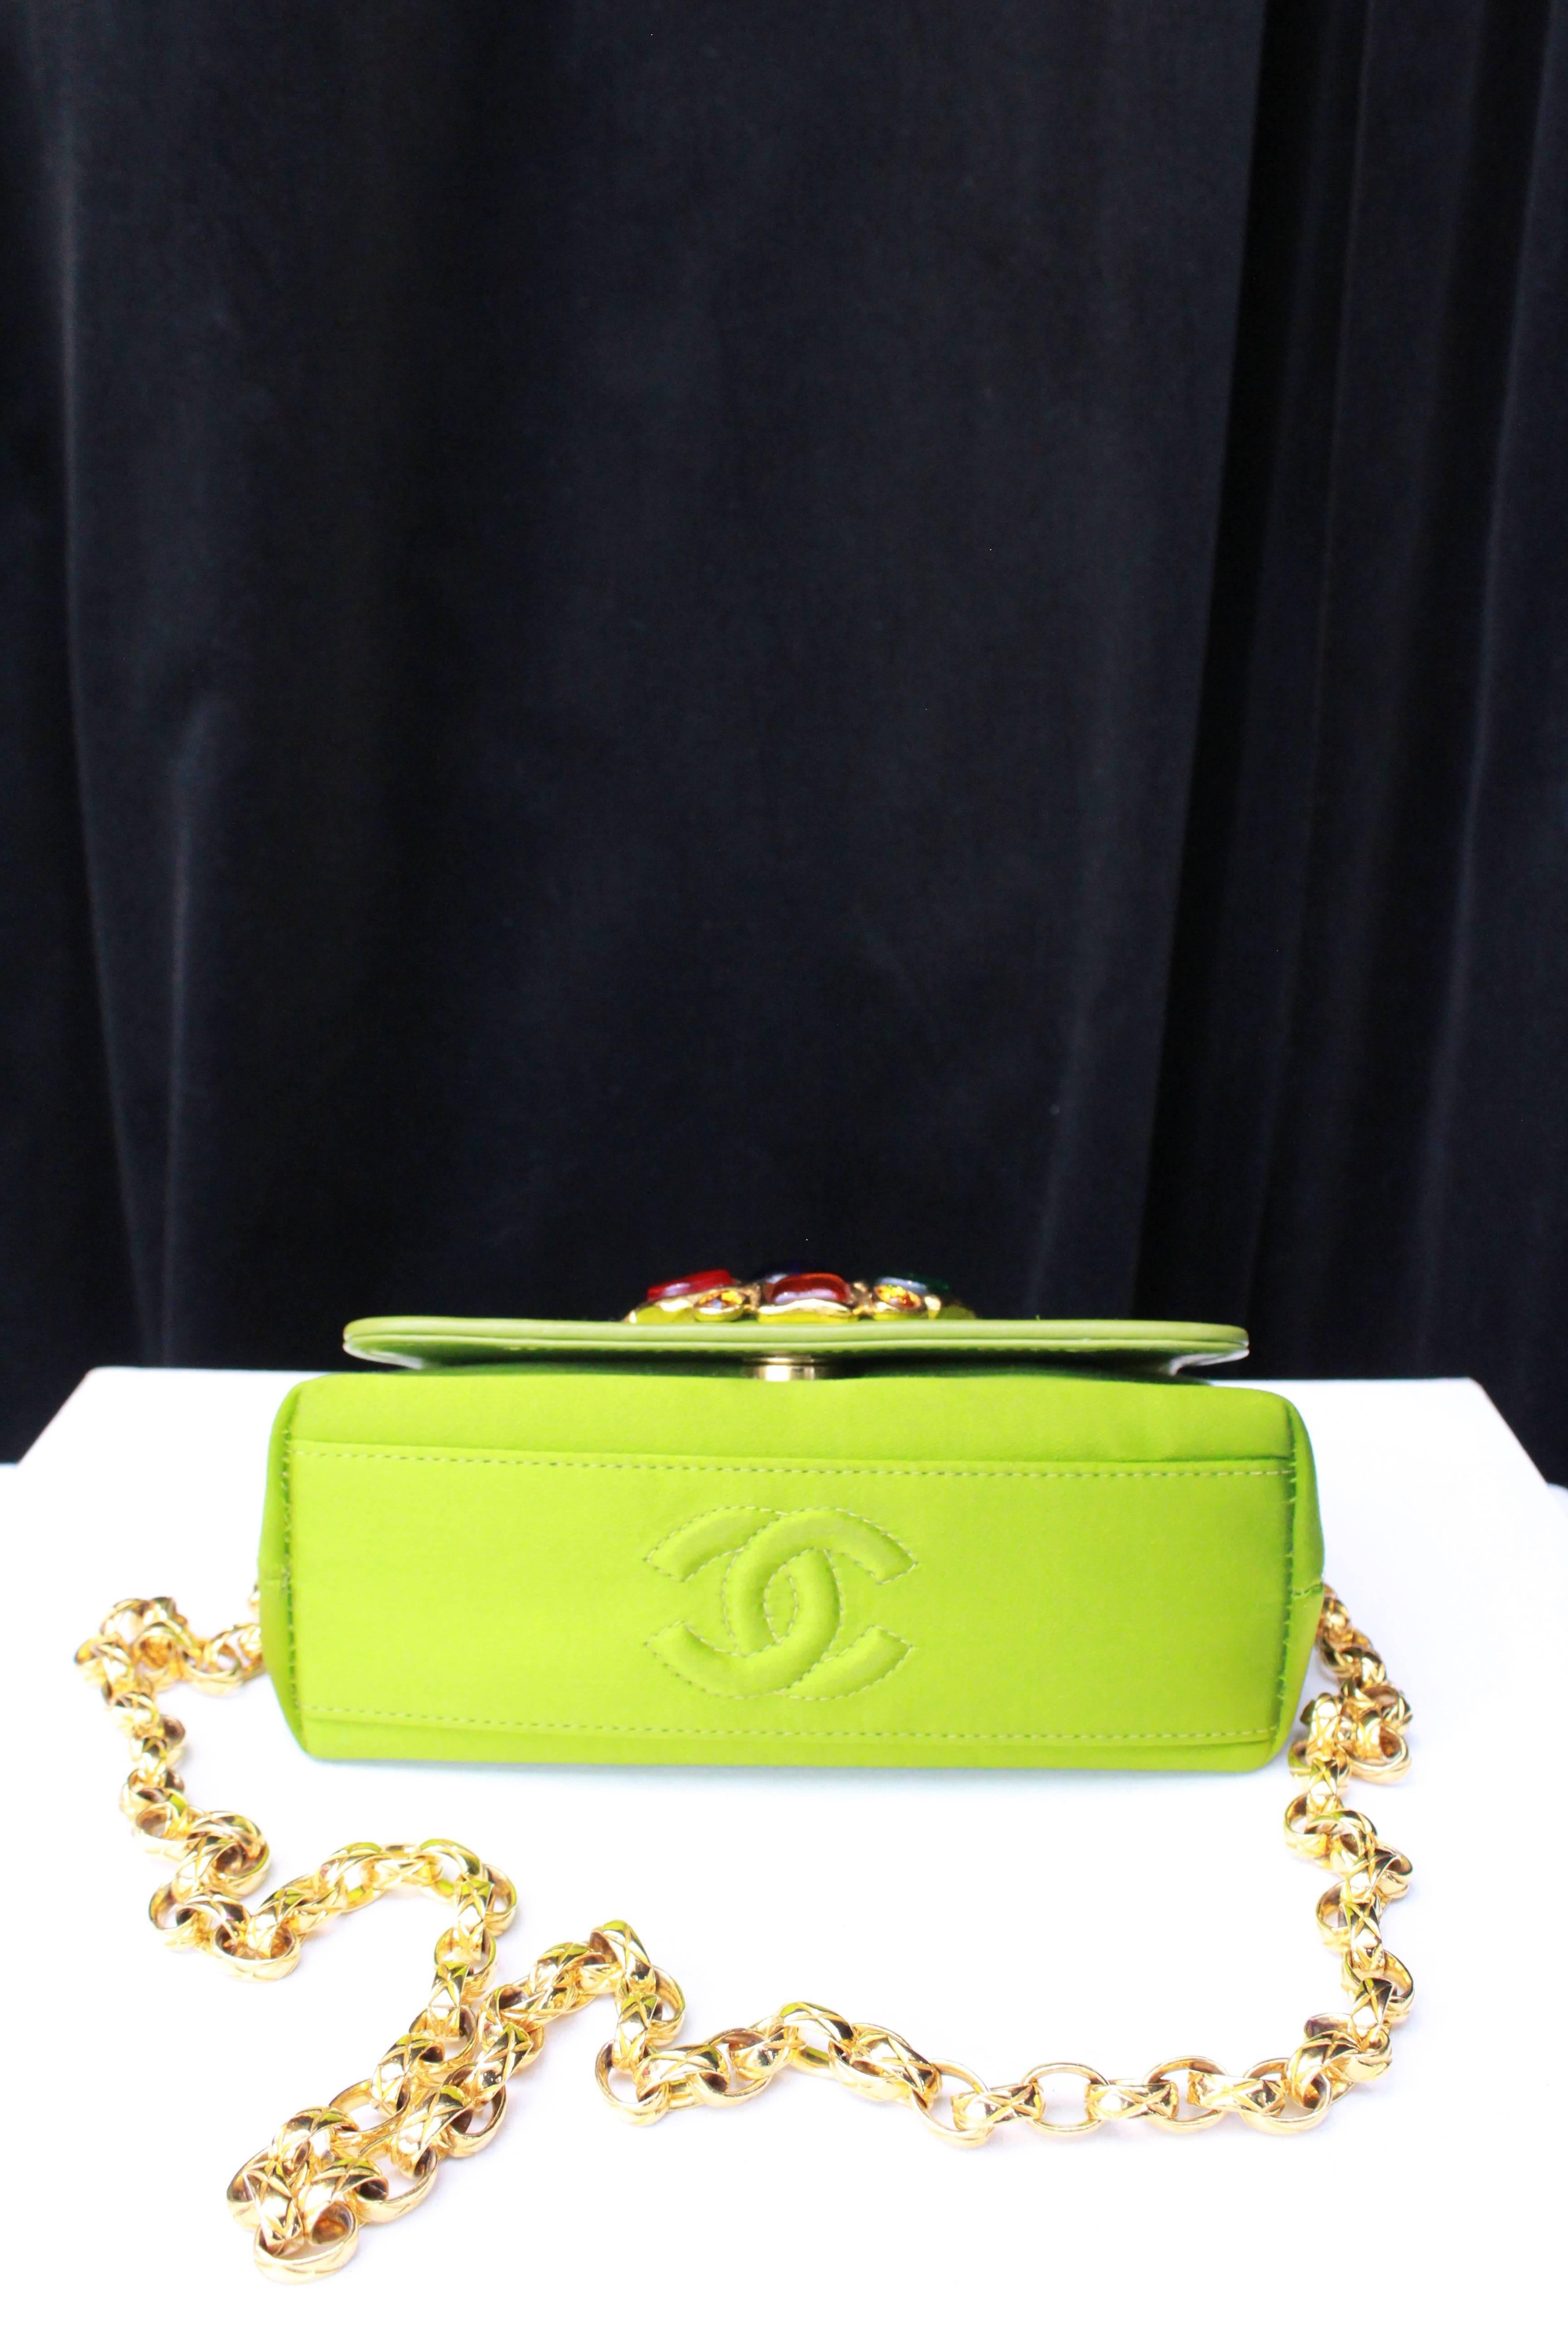 Chanel green satin jewel evening bag In Excellent Condition For Sale In Paris, FR